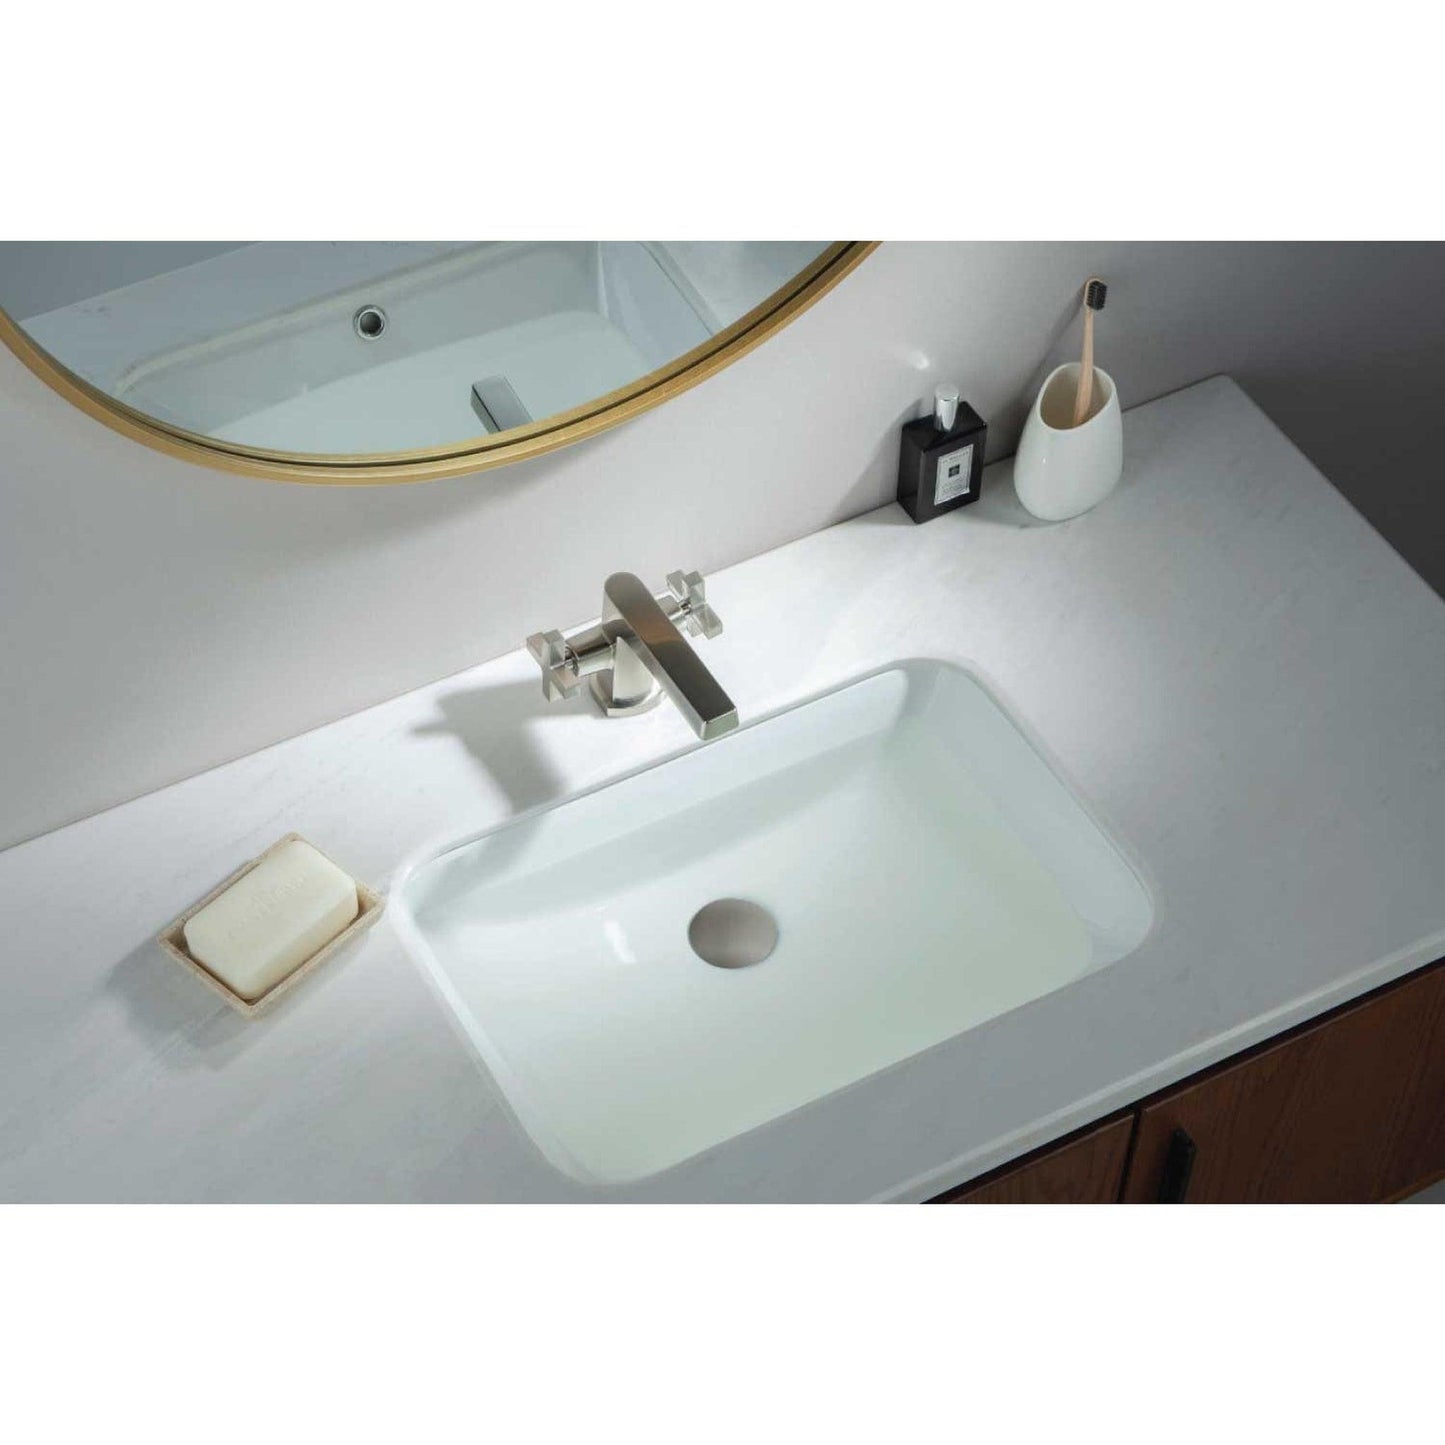 Isenberg Serie 240 4" Two-Handle Single-Hole Chrome Deck-Mounted Bathroom Sink Faucet With Pop-Up Drain